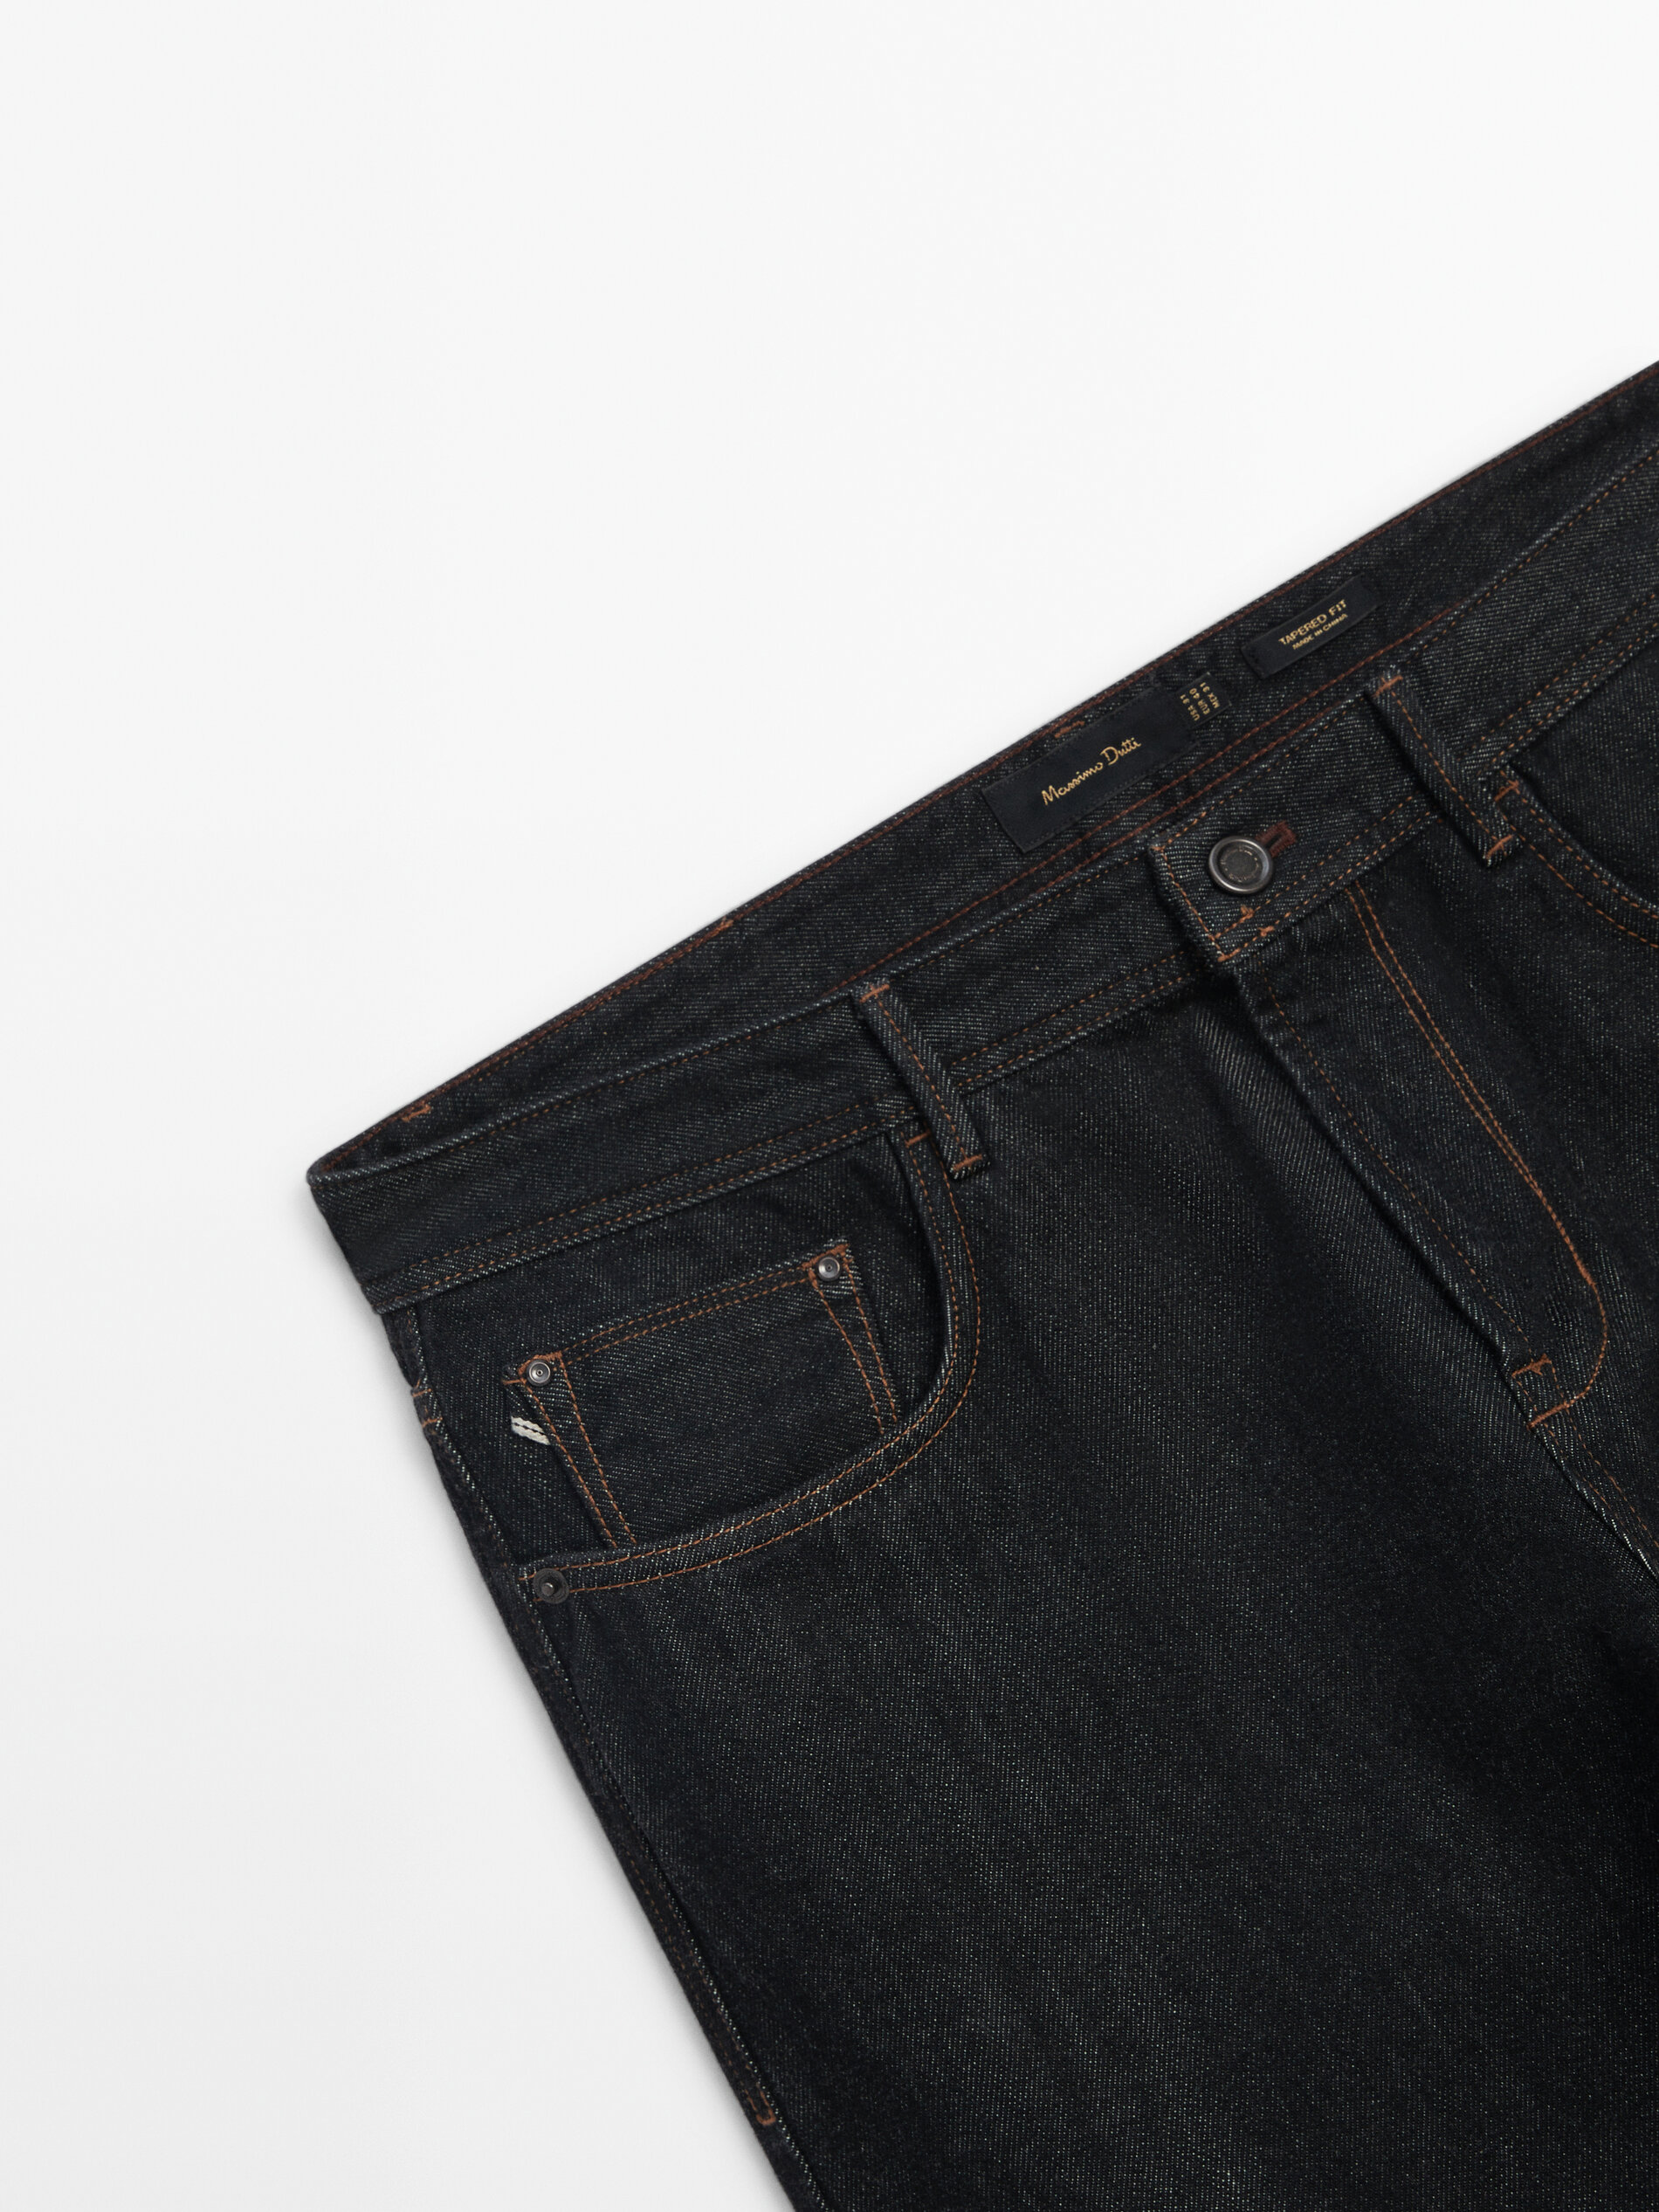 Jeans selvedge rinse wash tapered fit